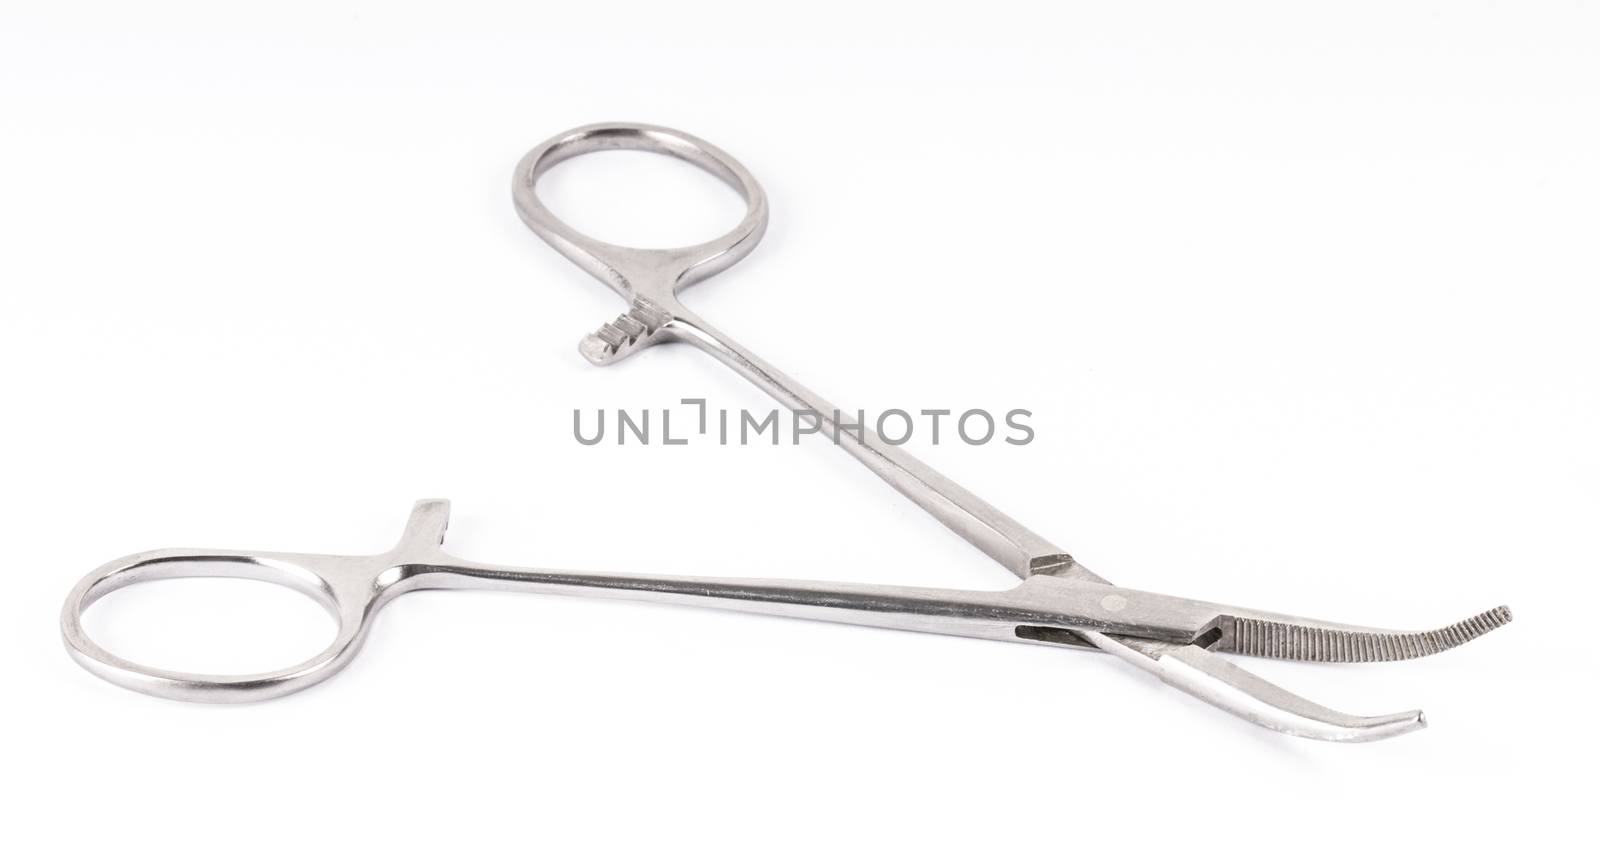 surgical clamps on a white background